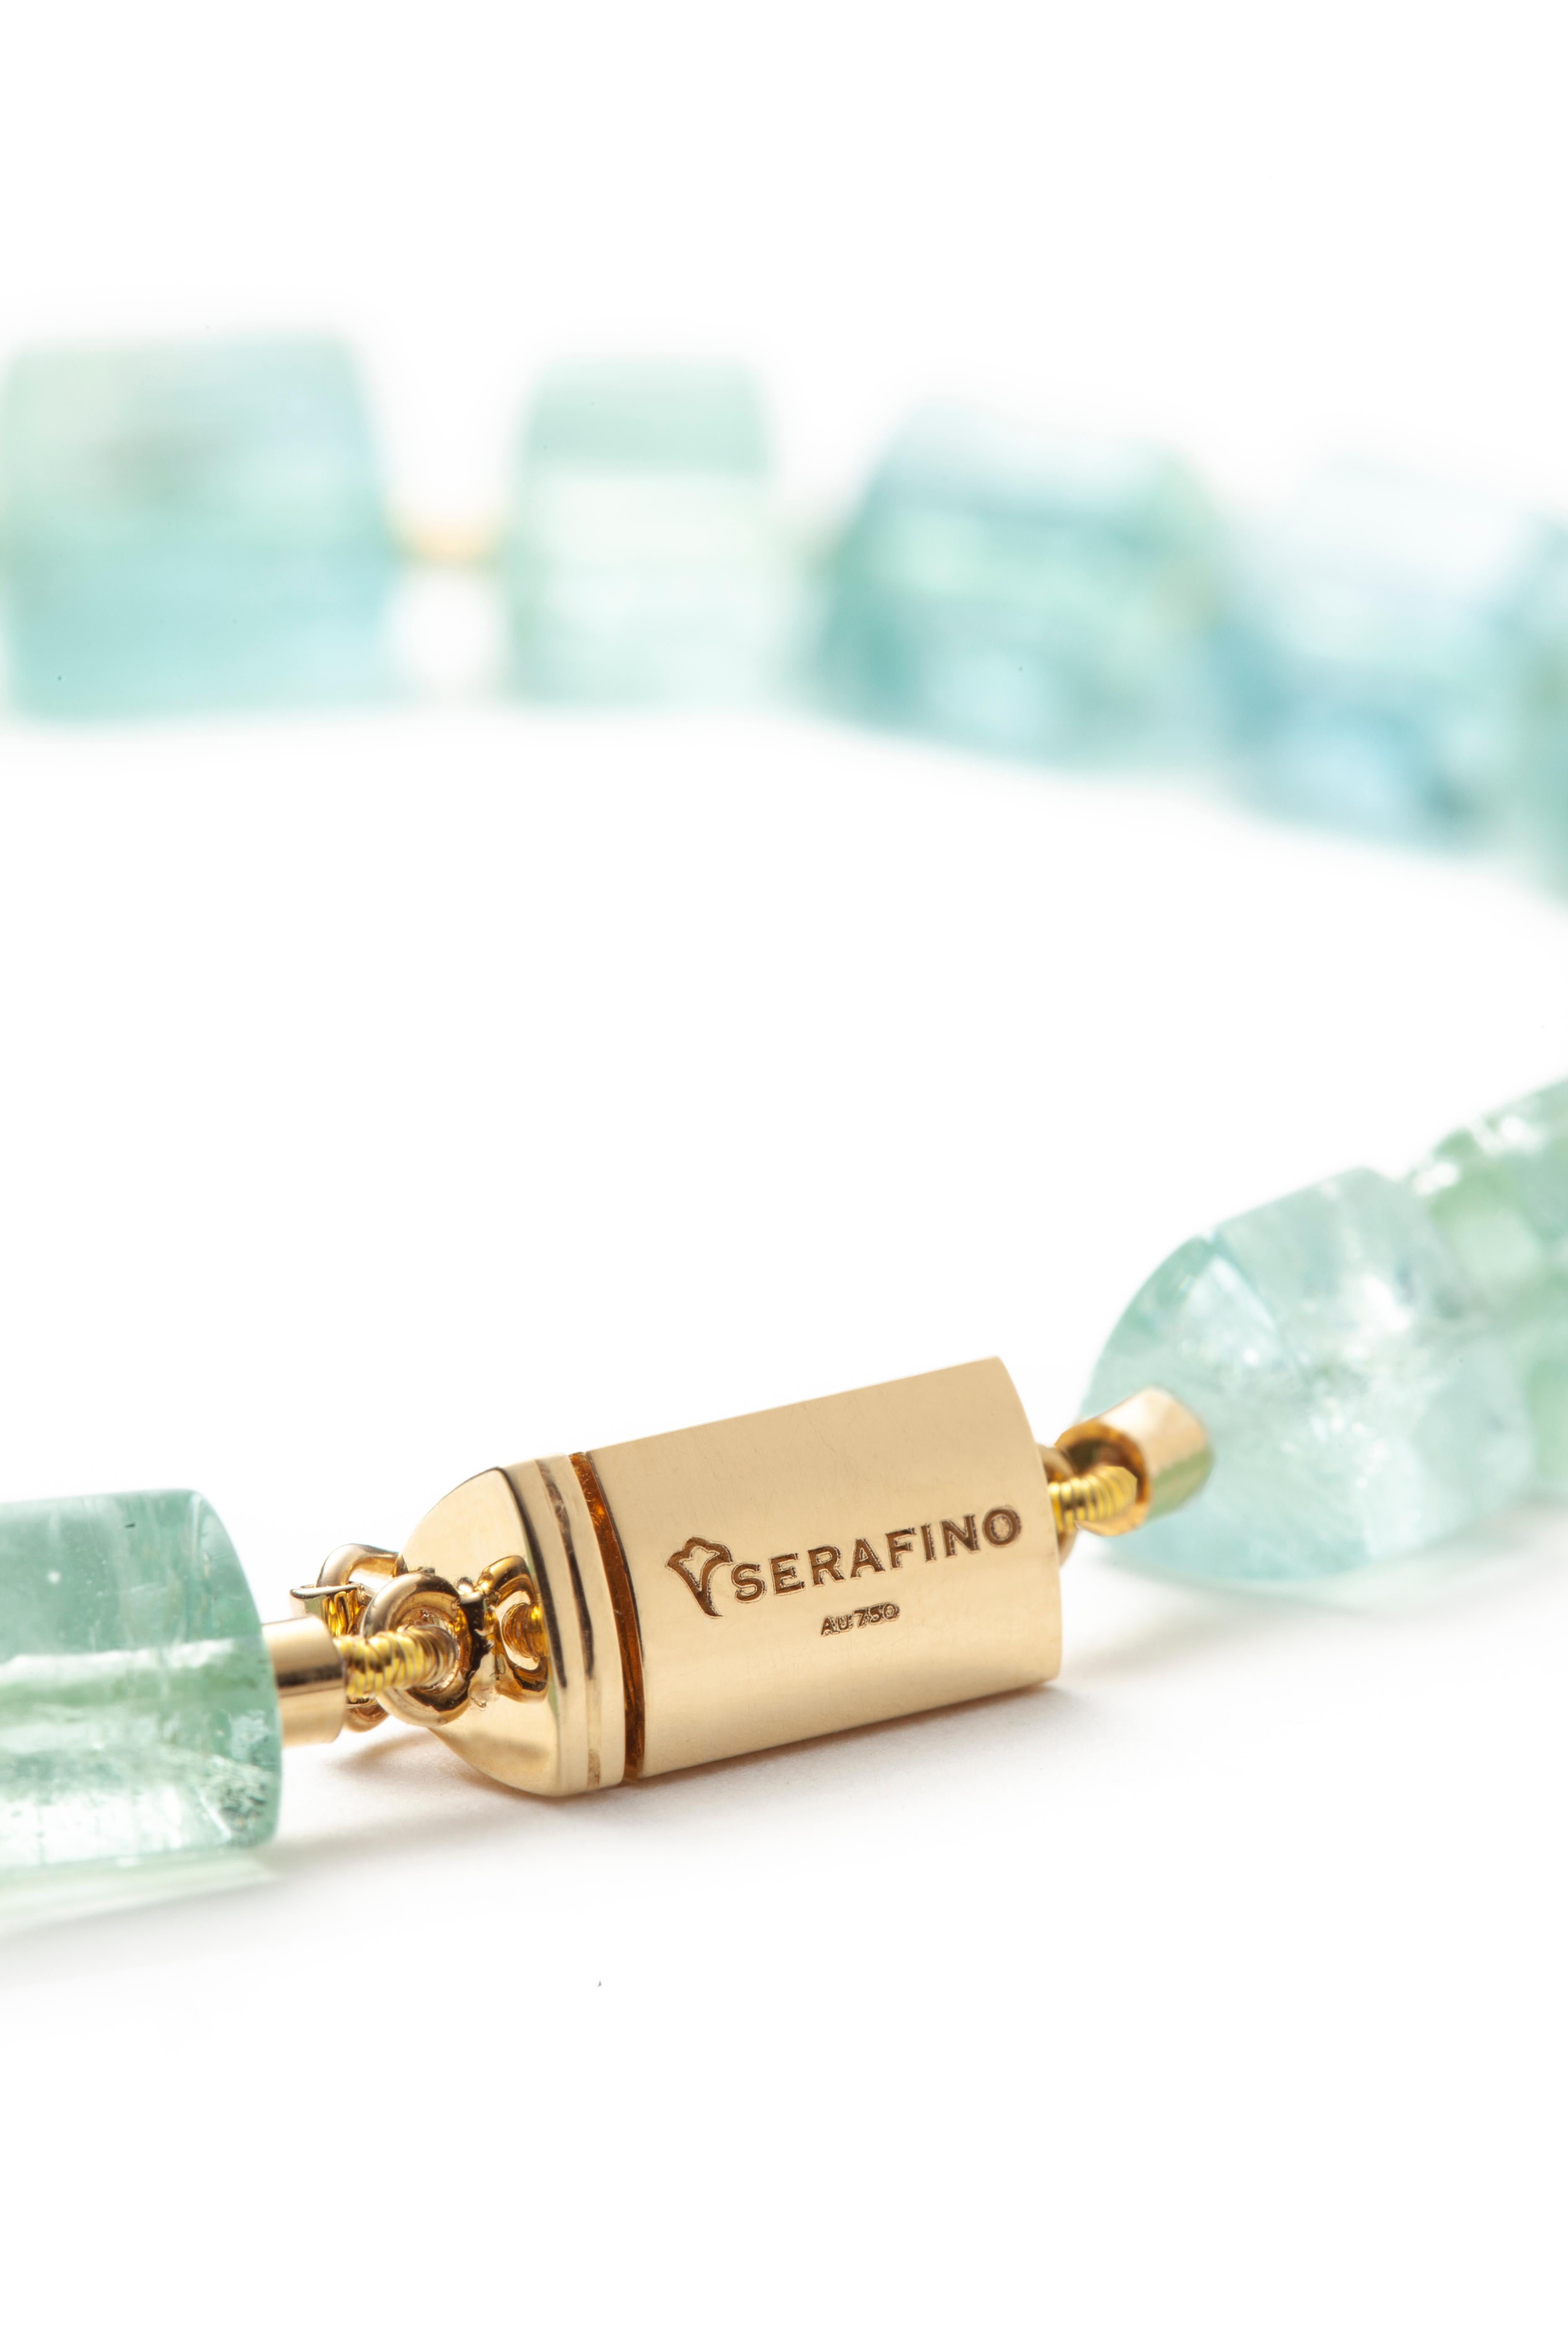 This natural aquamarine necklace is strung on silk and knotted for extra security, it adapts perfectly to the shape of your neck.
Triangular aquamarine beads in hues going from a crystal clear baby-blue to a translucent sea-green are heightened by